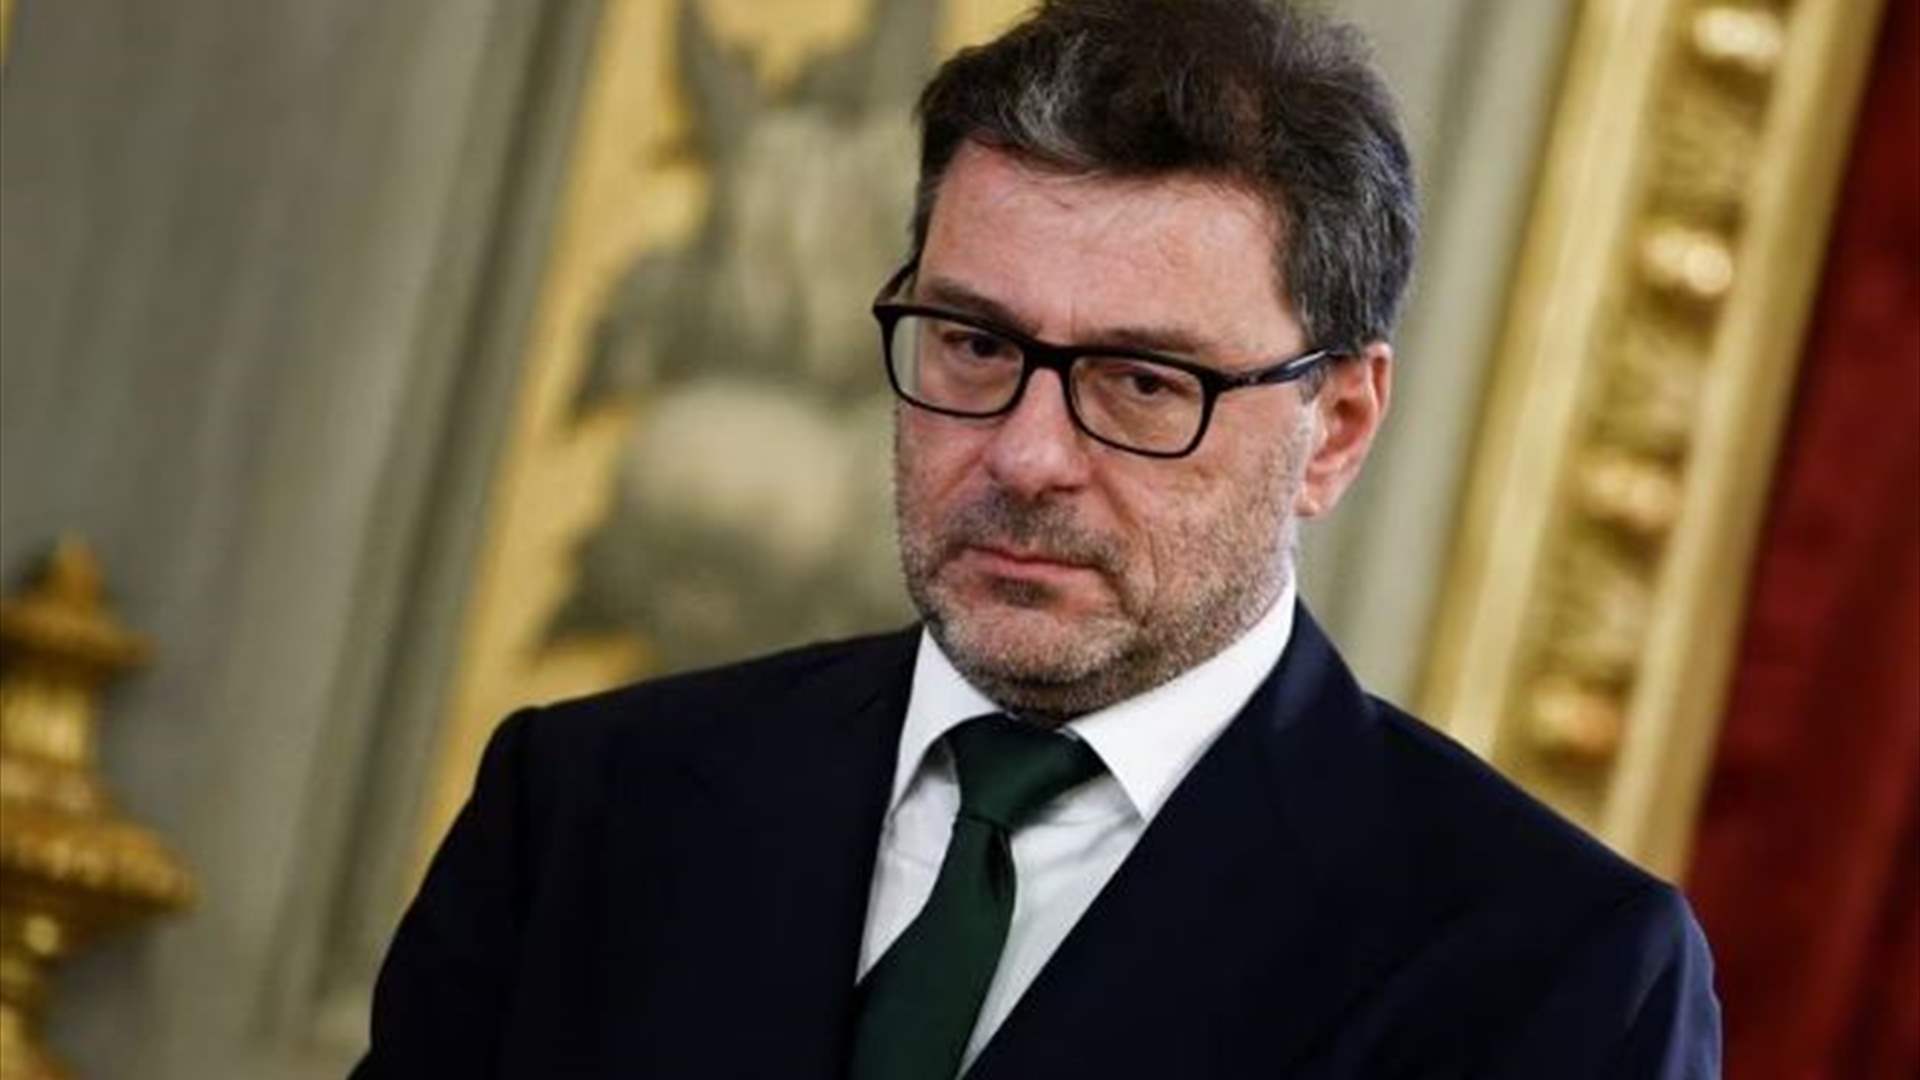 Italy outlines contested tax reform plan to unions